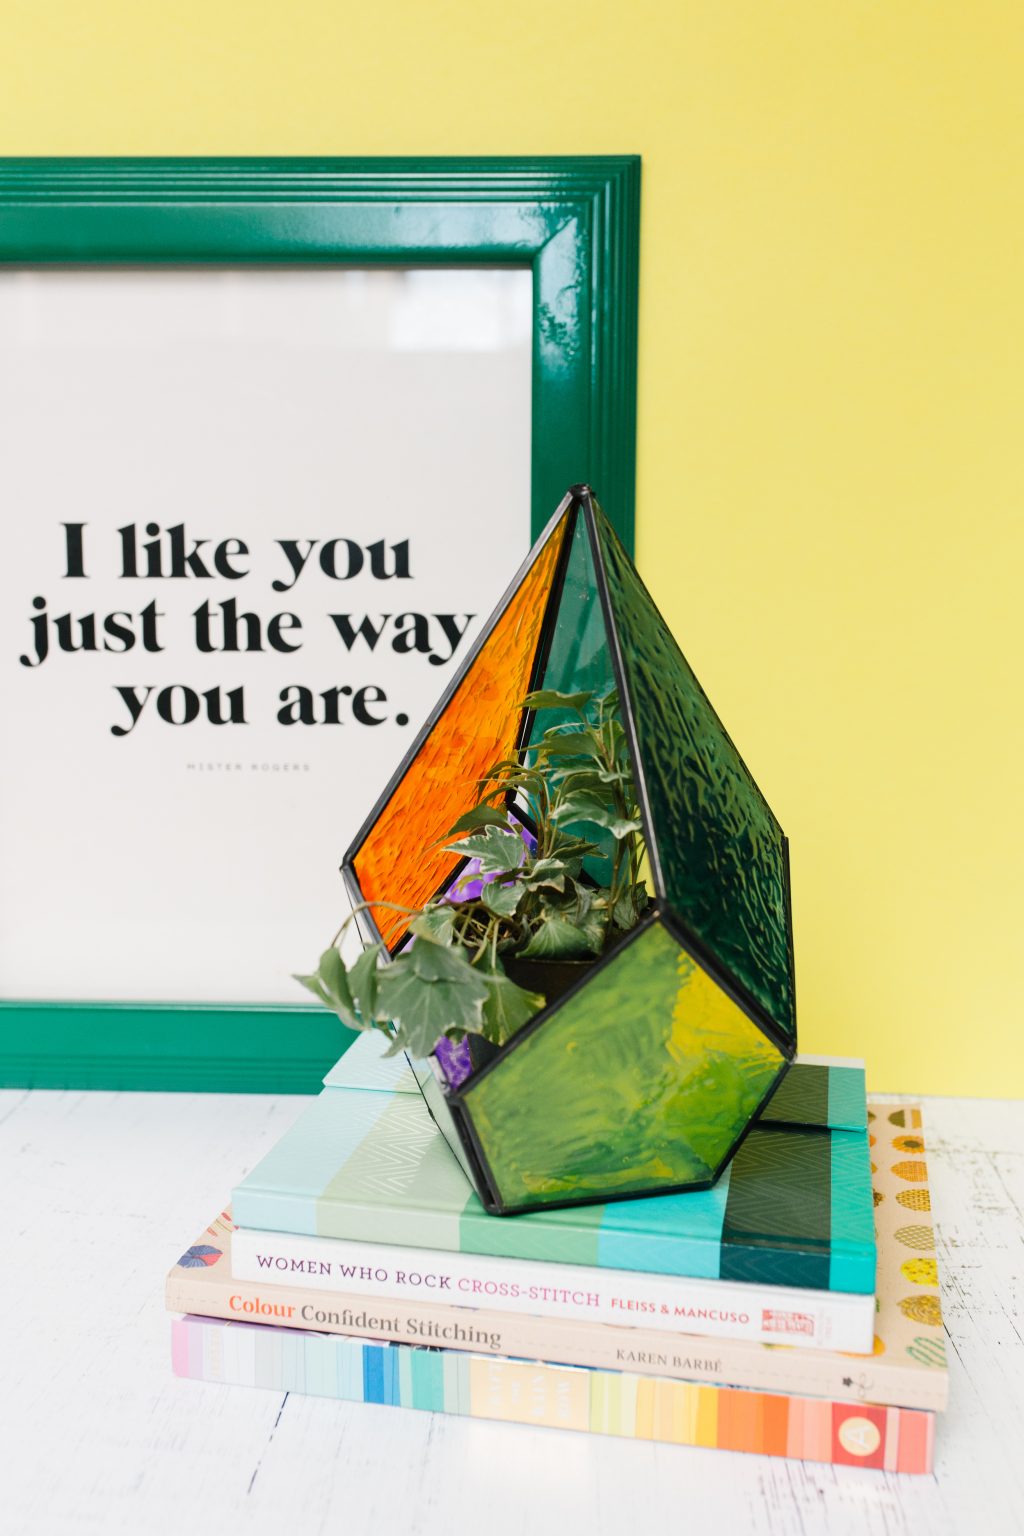 Faux Stained Glass Terrarium Tutorial + a tutorial featured by Top US Craft Blog + The Pretty Life Girls